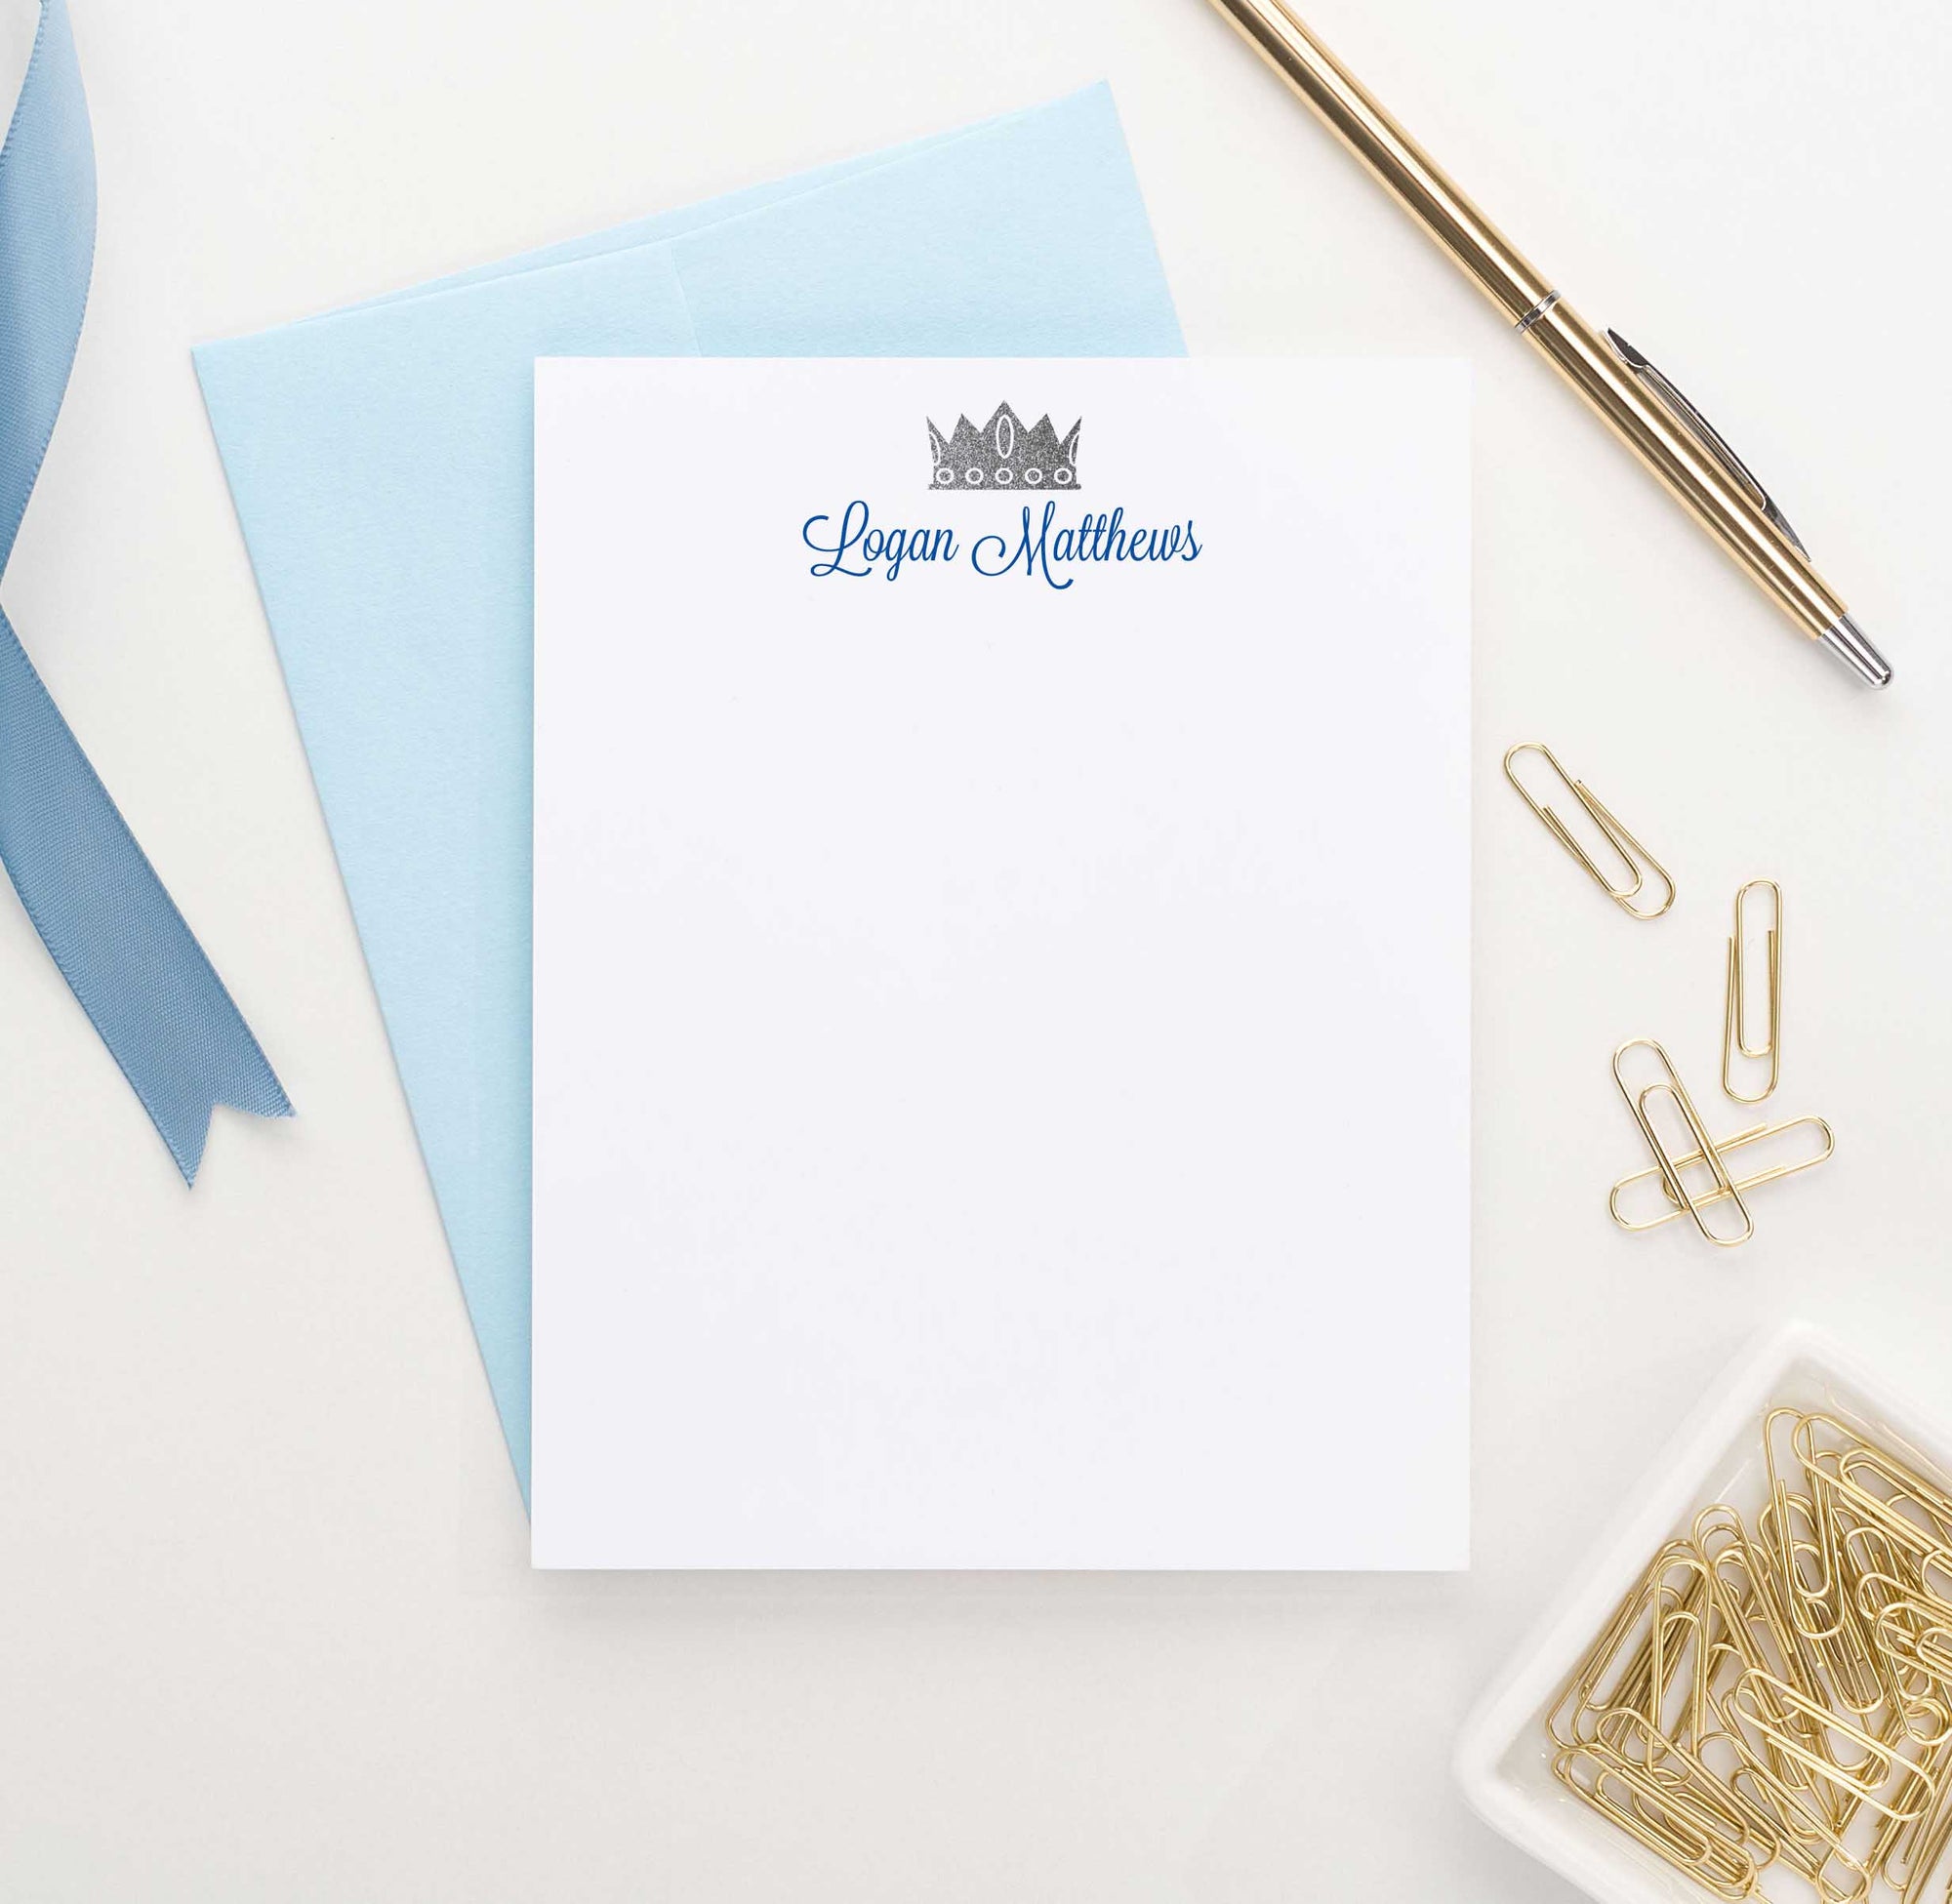 KS074 personalized prince crown stationary for boys kids king royal notecard